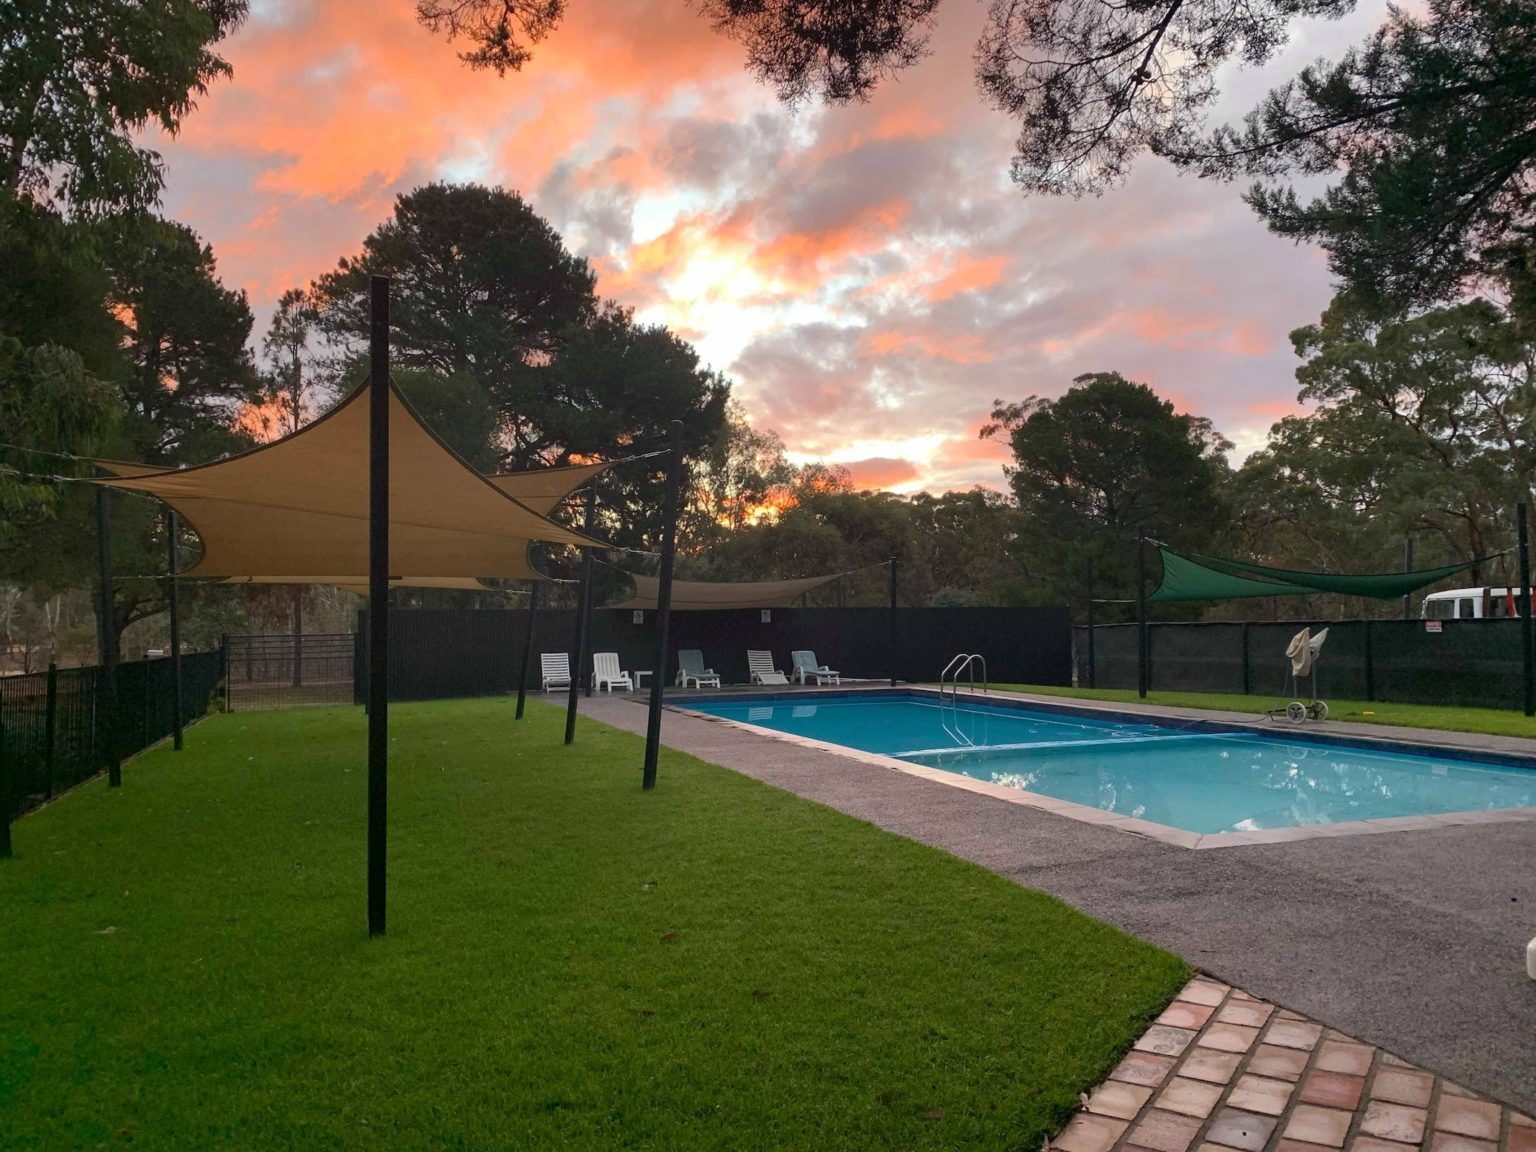 Grampians Sunset over the pool